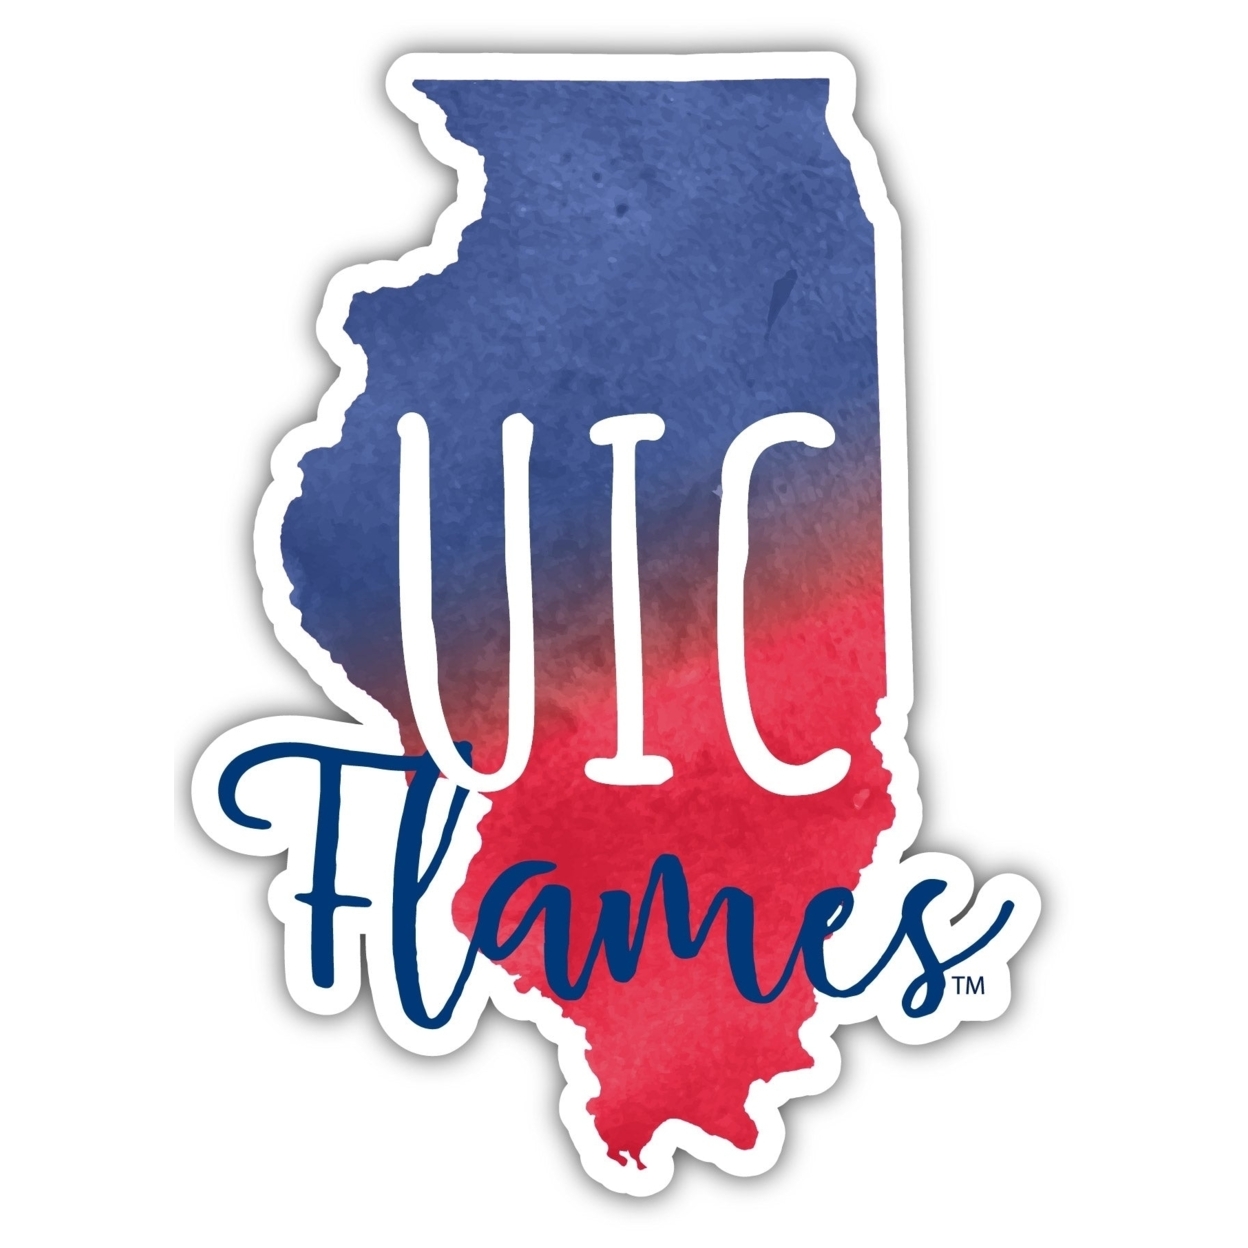 University Of Illinois At Chicago Watercolor State Die Cut Decal 2-Inch